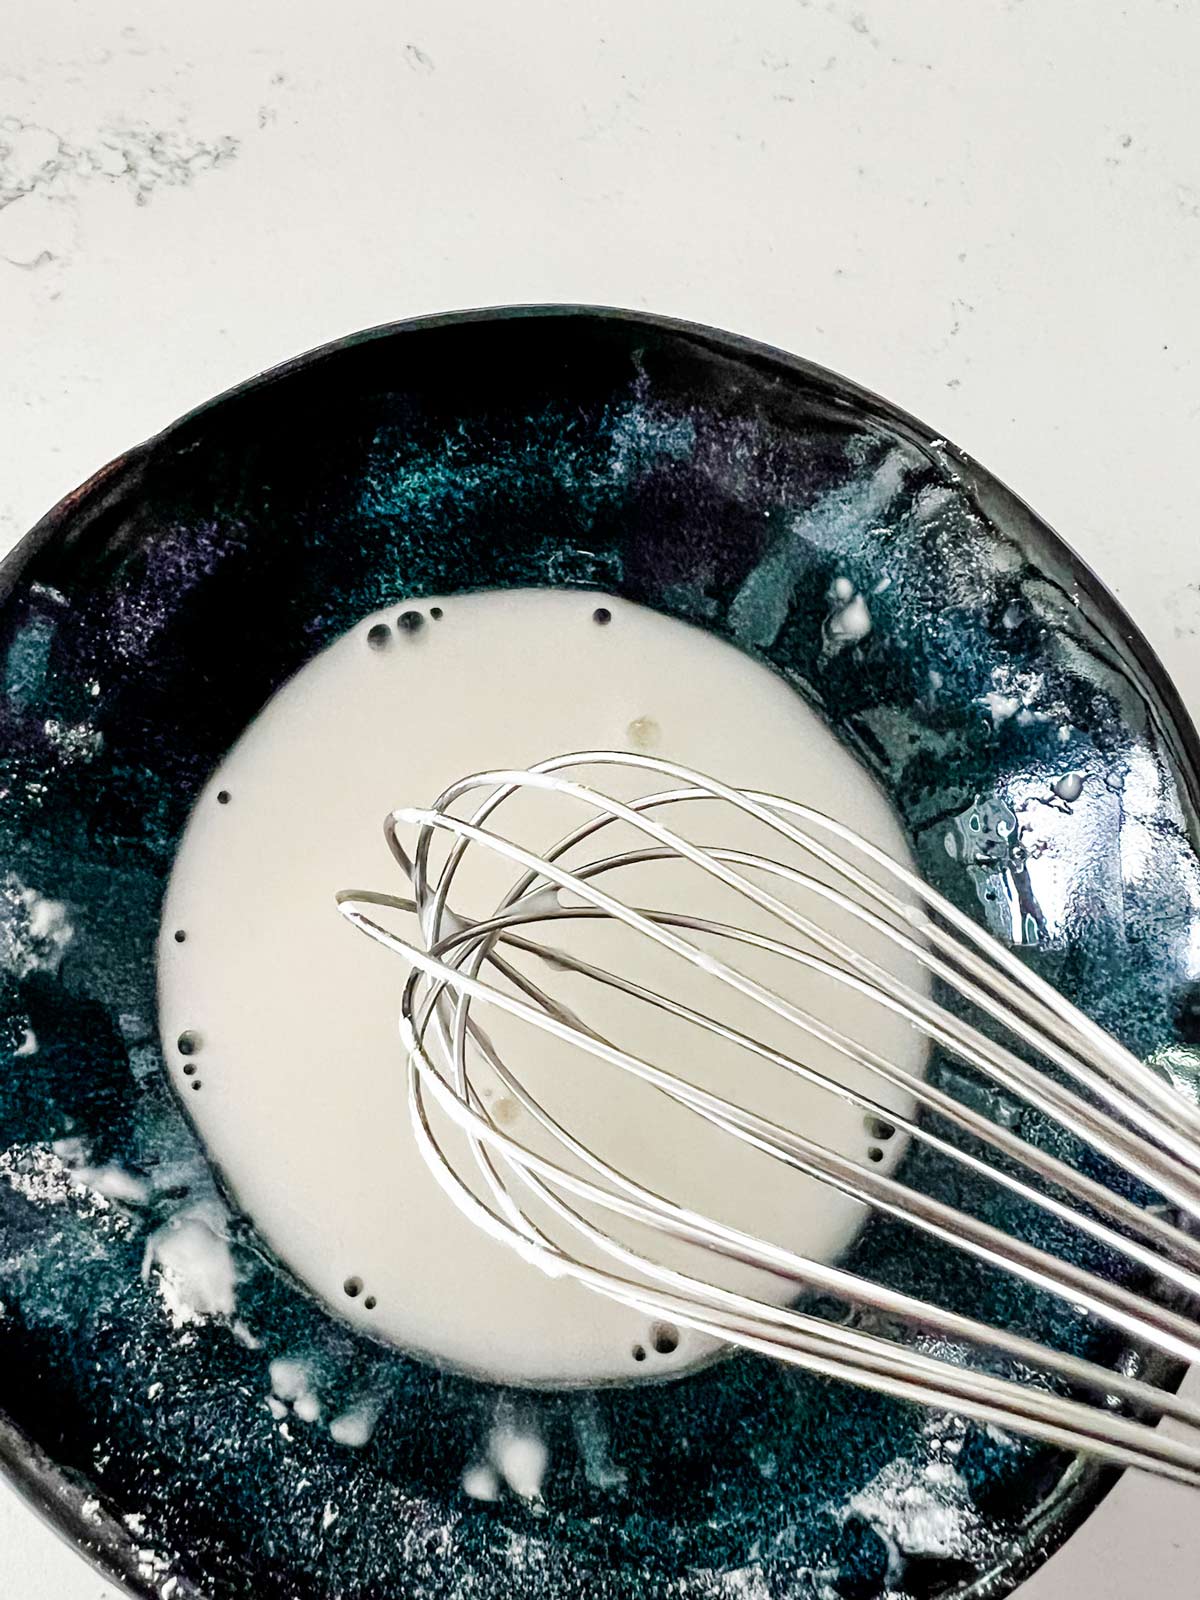 Water and cornstarch being whisked together in a small bowl.